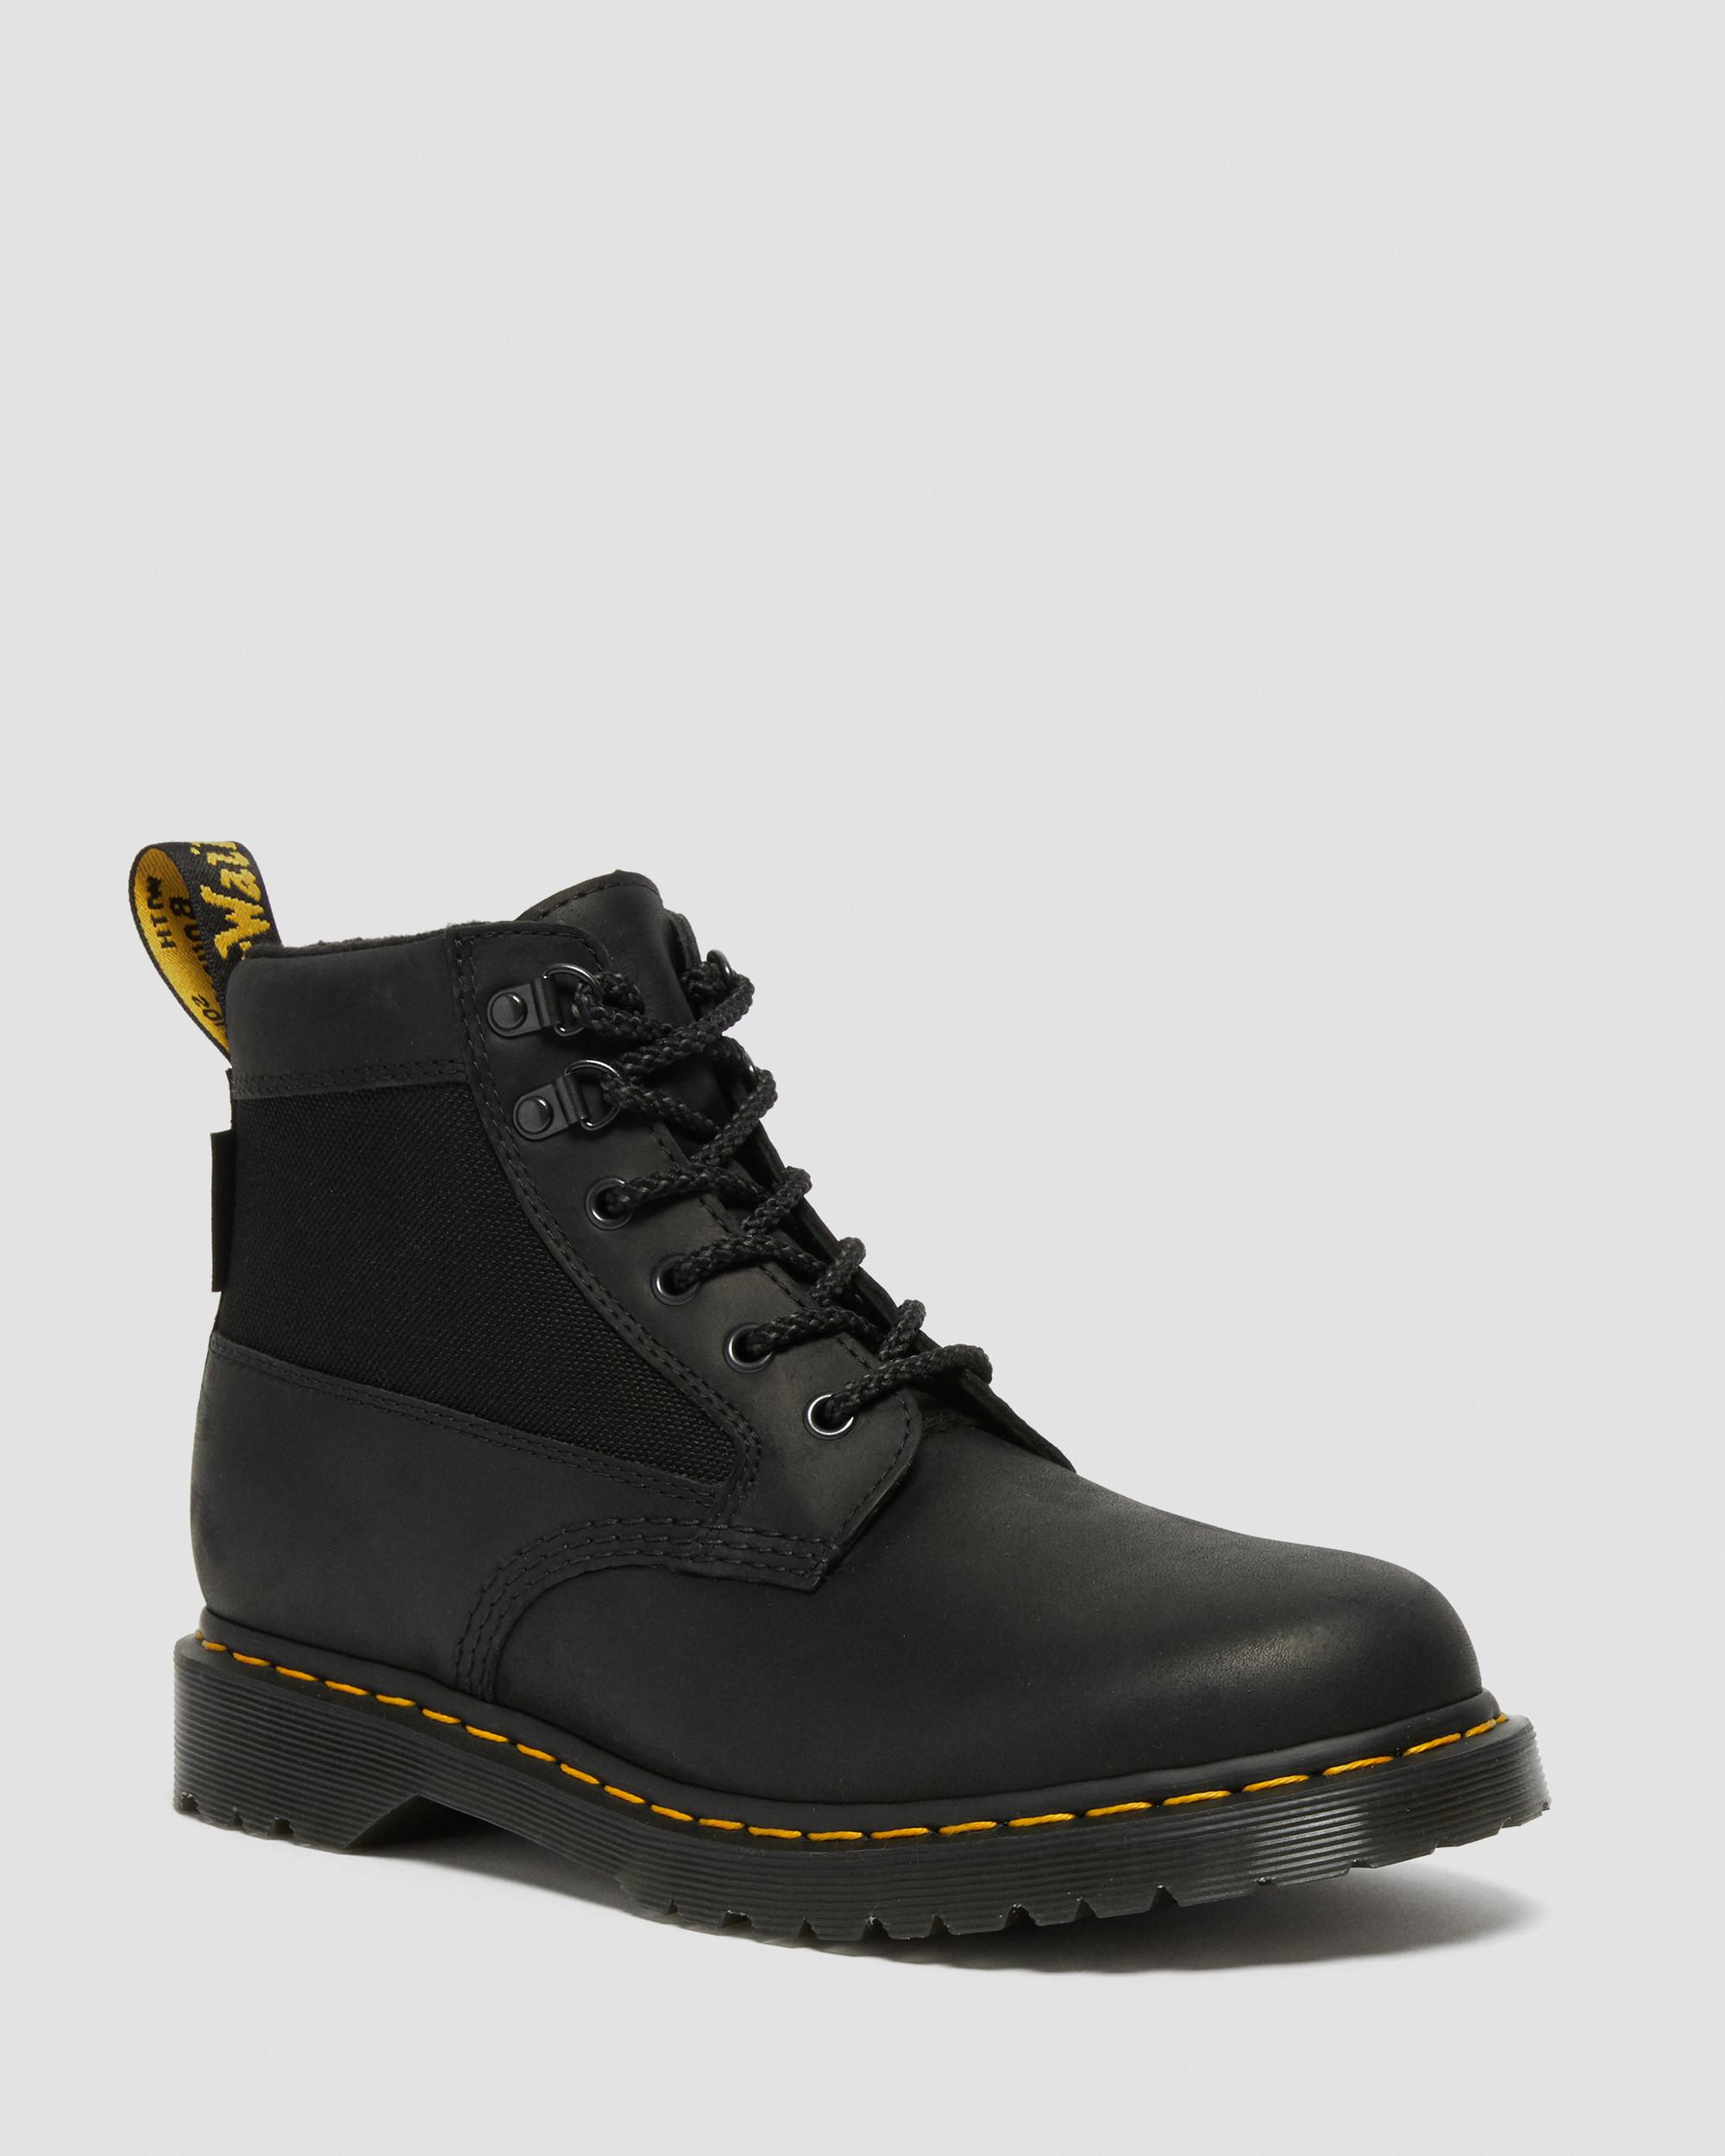 101 Yellow Stitch Smooth Leather Ankle Boots, Black | Dr. Martens